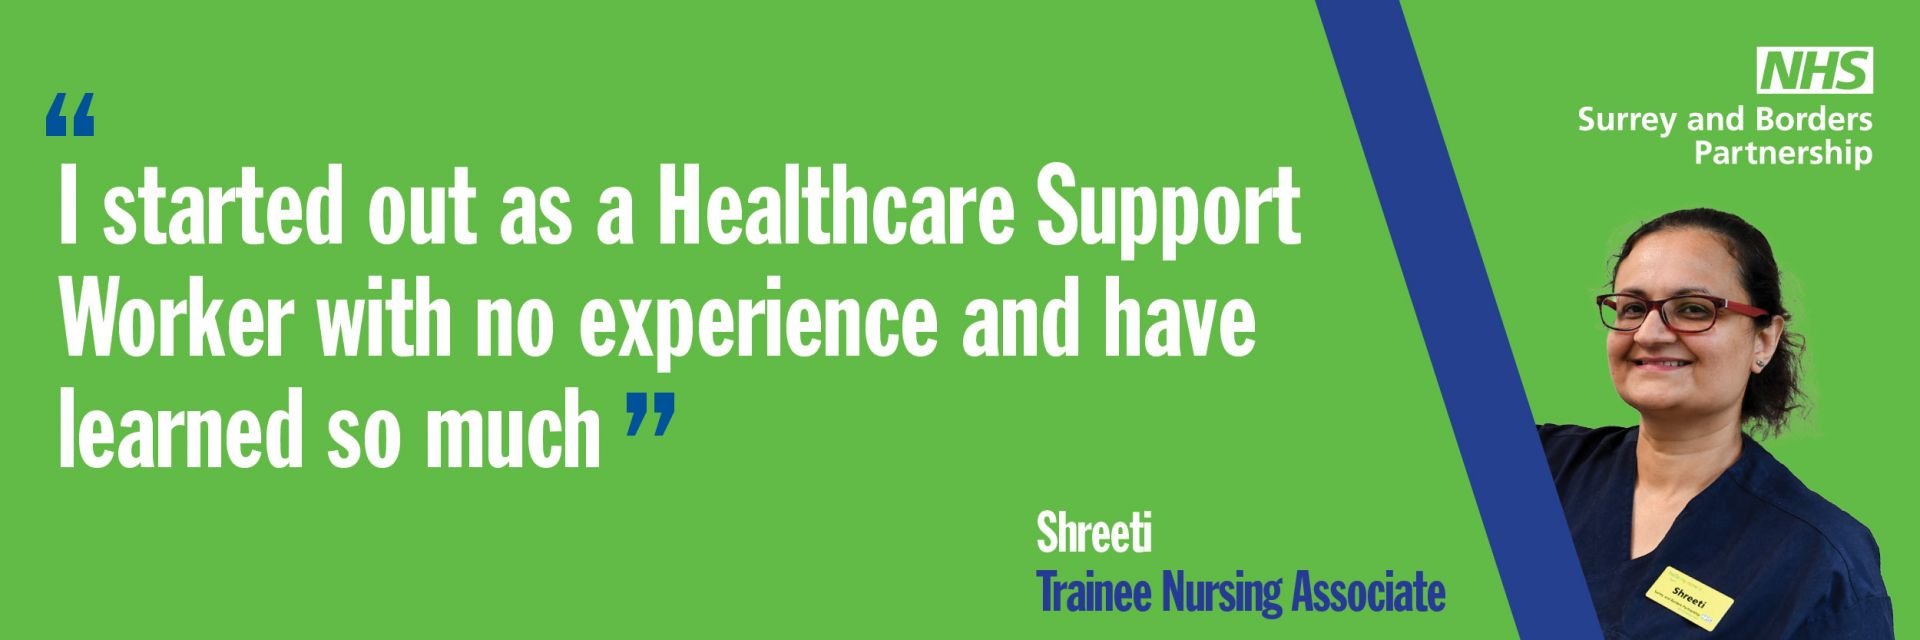 A member of staff quoting the benefits of working for our Trust